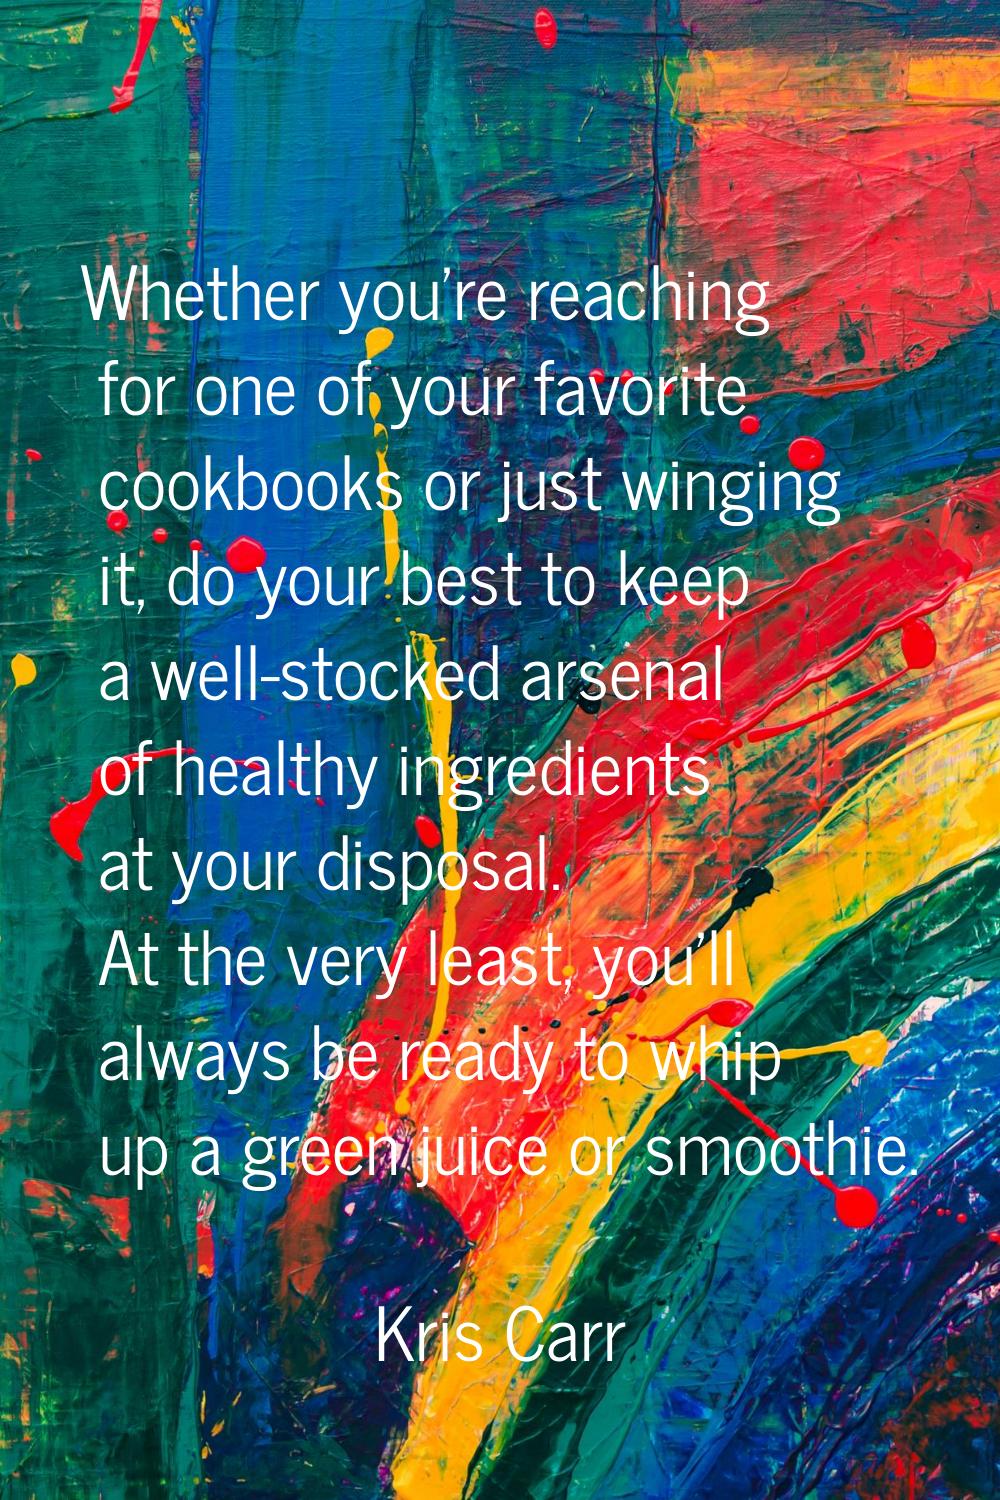 Whether you're reaching for one of your favorite cookbooks or just winging it, do your best to keep